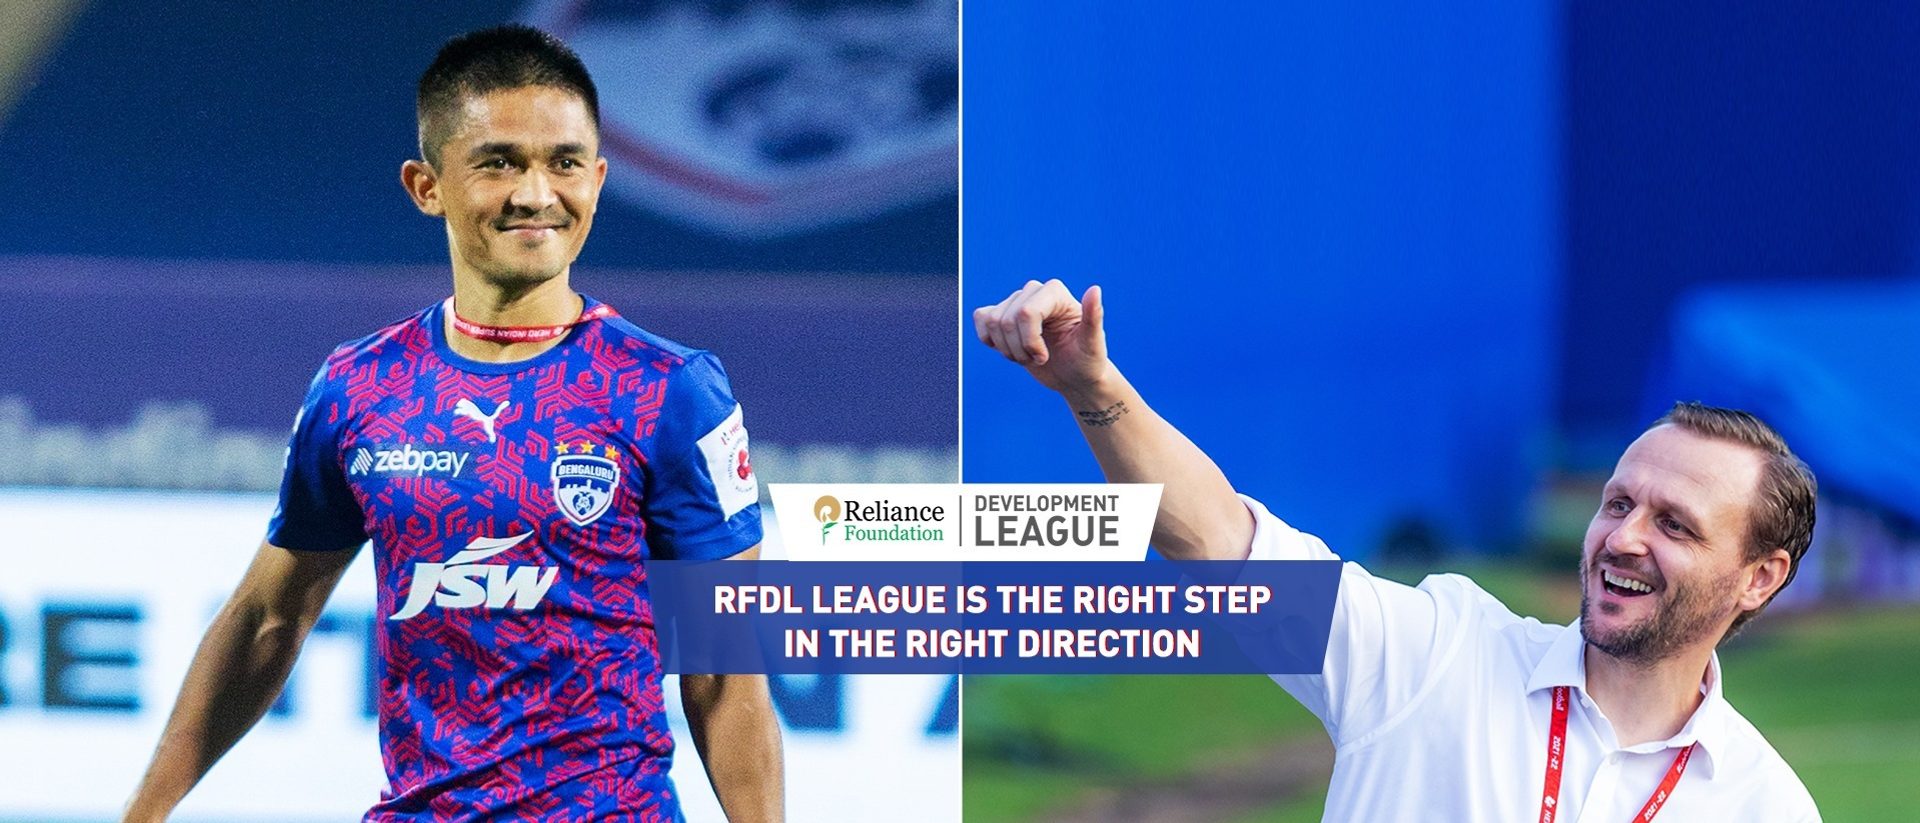 RFDL is the right step in the right direction: Sunil Chhetri